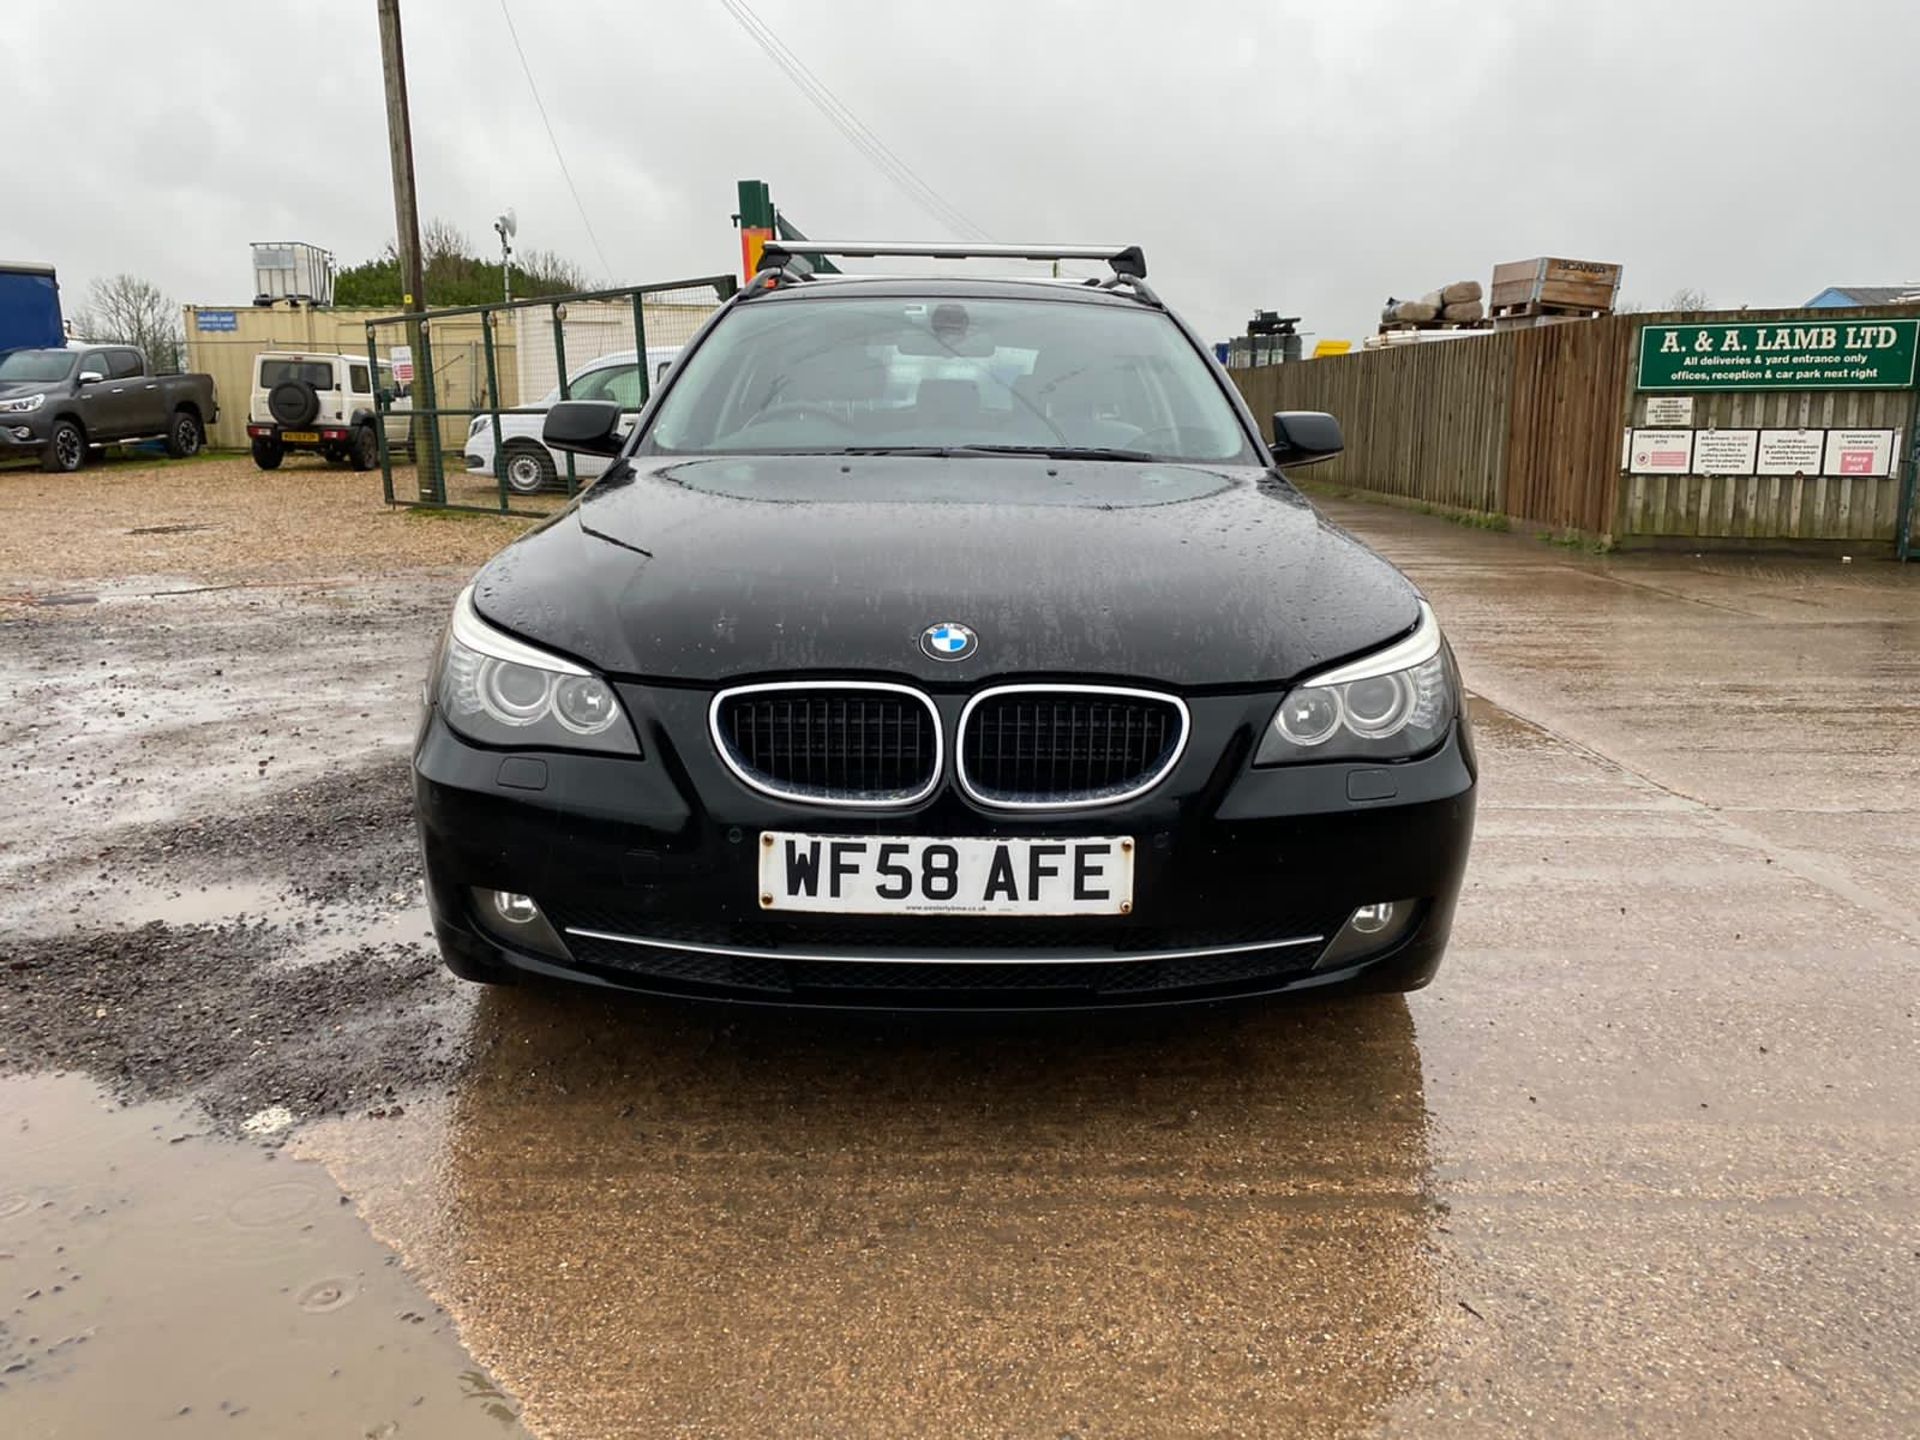 (On Sale) BMW 520d "SPECIAL EQUIPMENT" ESTATE (58 REG) HEATED SEATS- CRUISE -ELEC PACK - AC (NO VAT) - Image 5 of 19